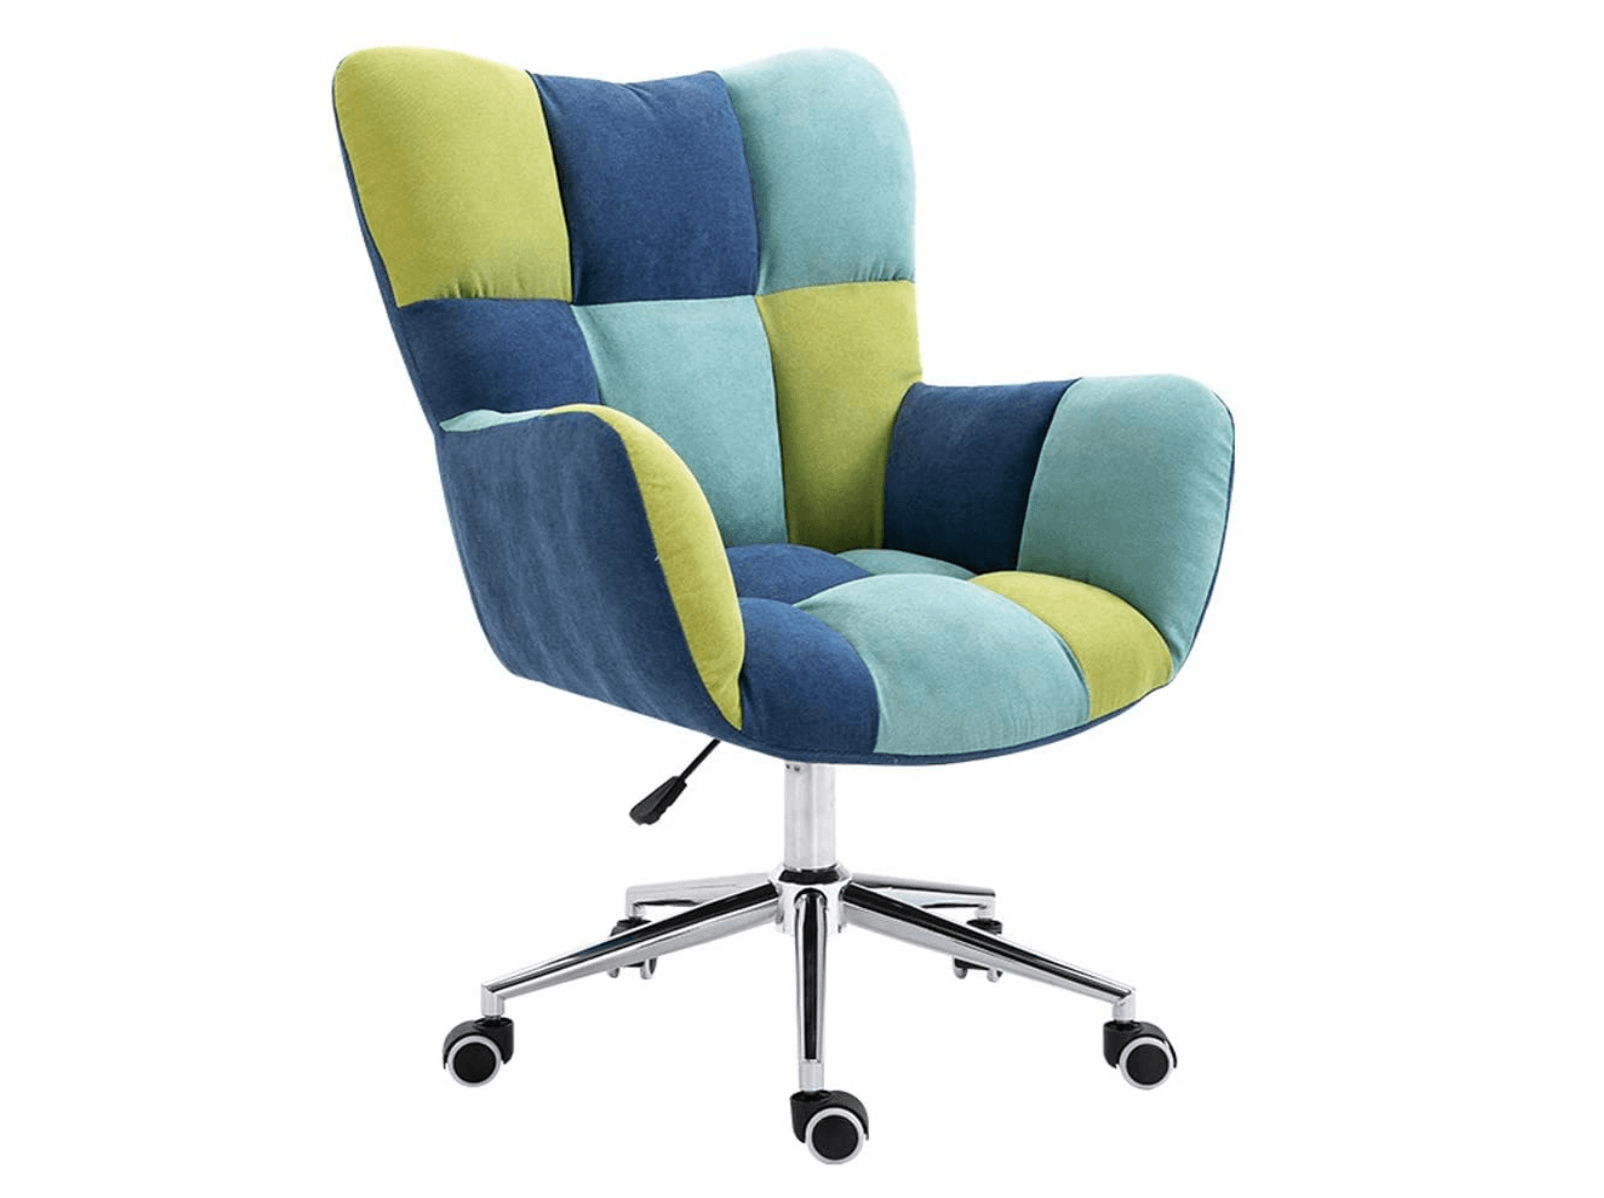 A checked office chair in blue, teal, and apple green.